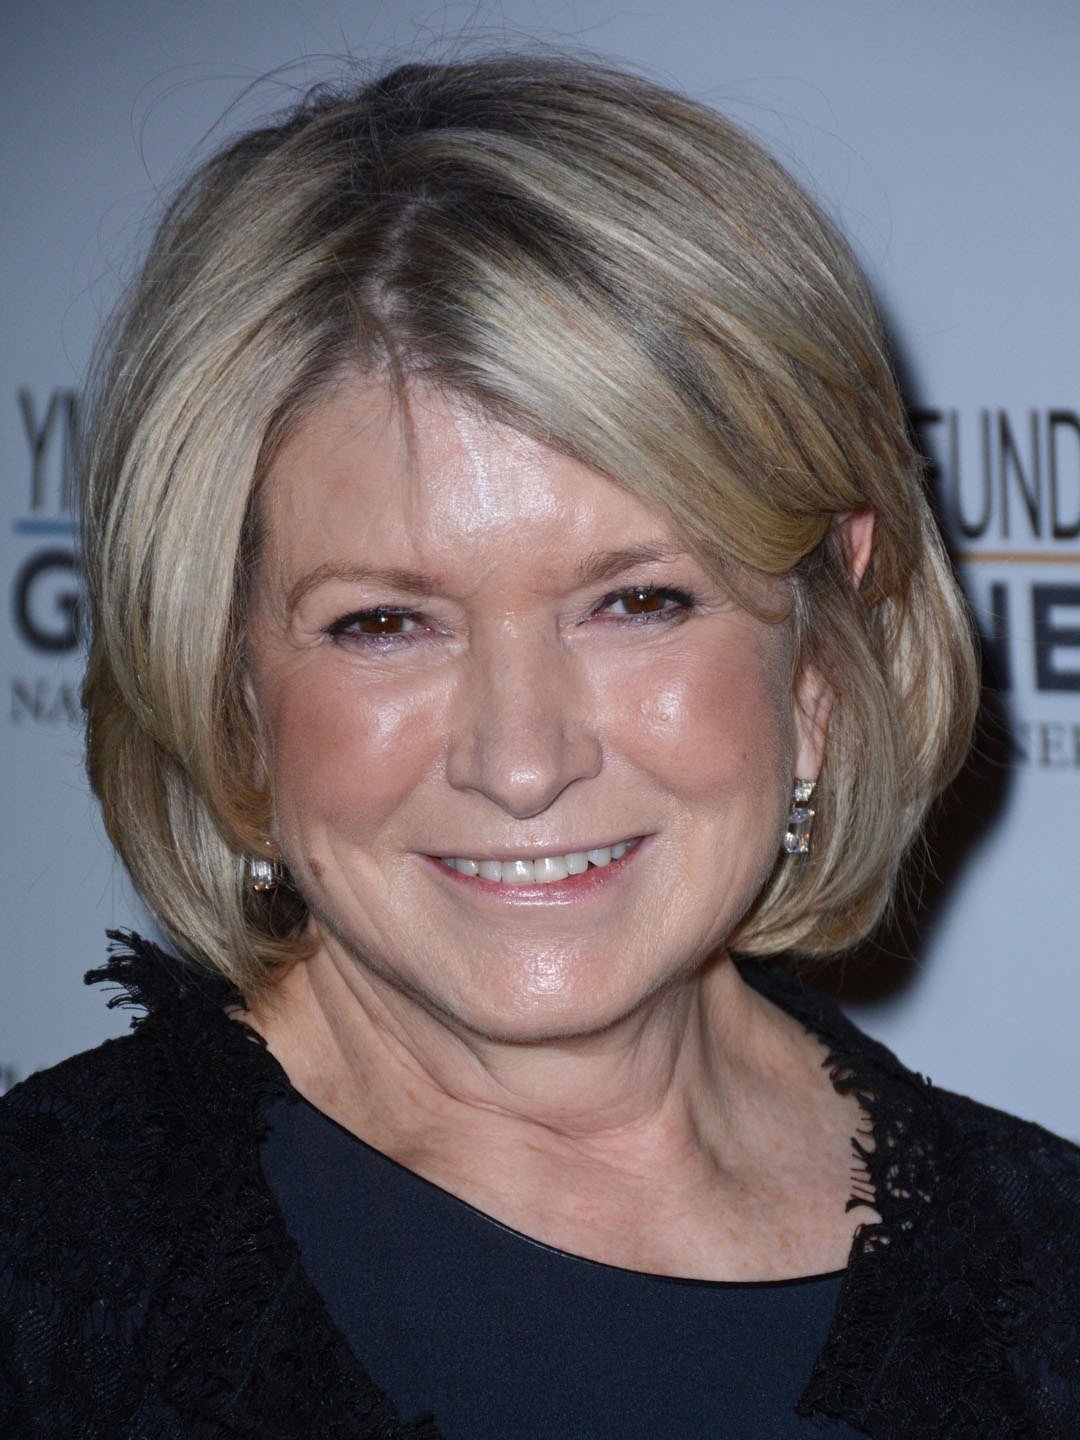 26 products and 10 experts: Martha Stewart's costly beauty regime -  Telegraph